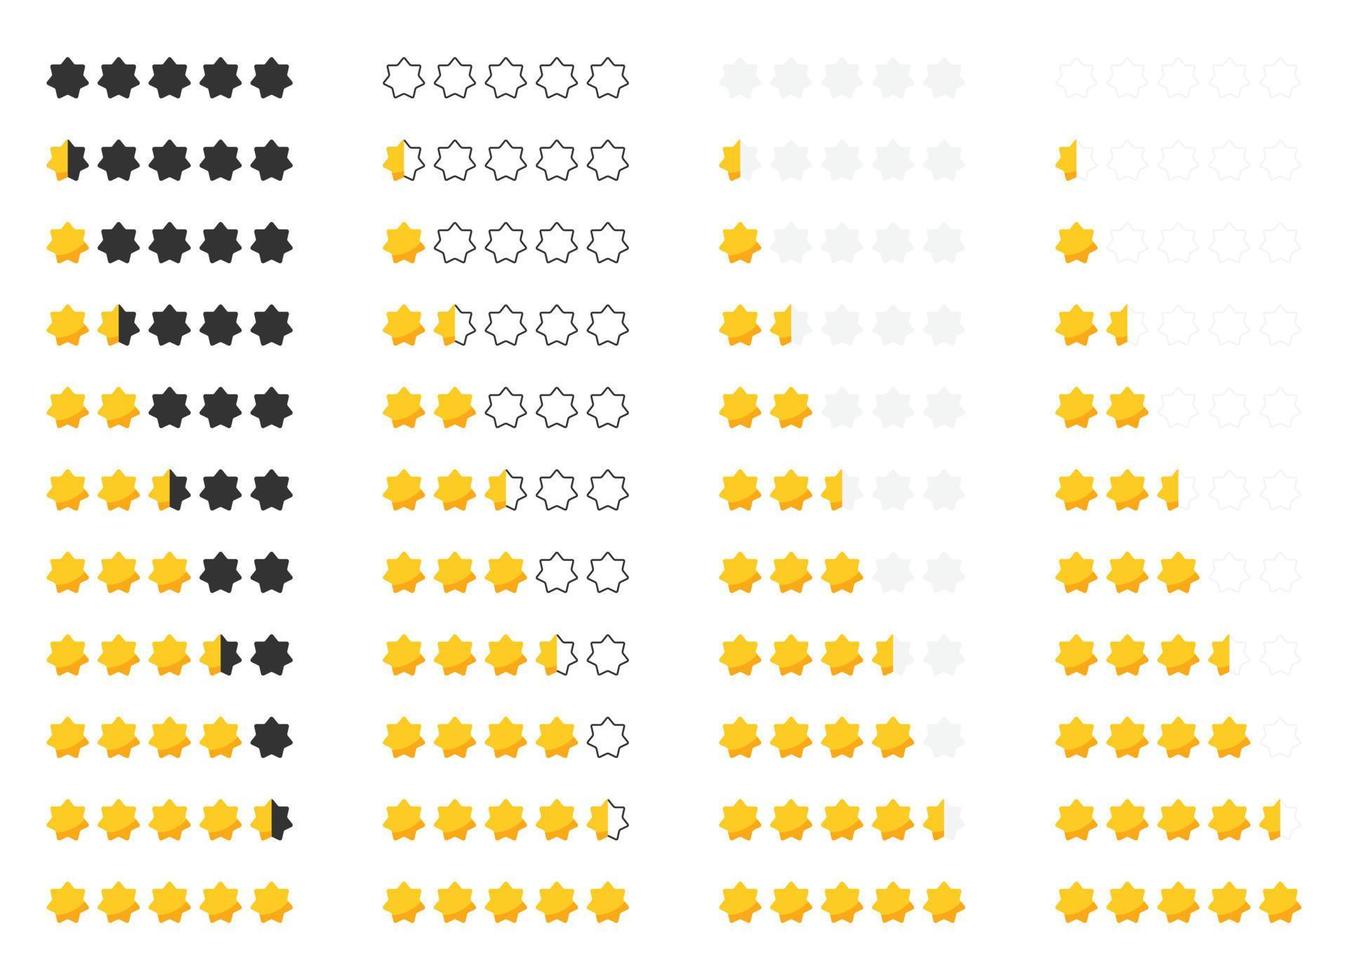 Star rating review from zero to five with gold stars. Customer review or feedback set vector illustration